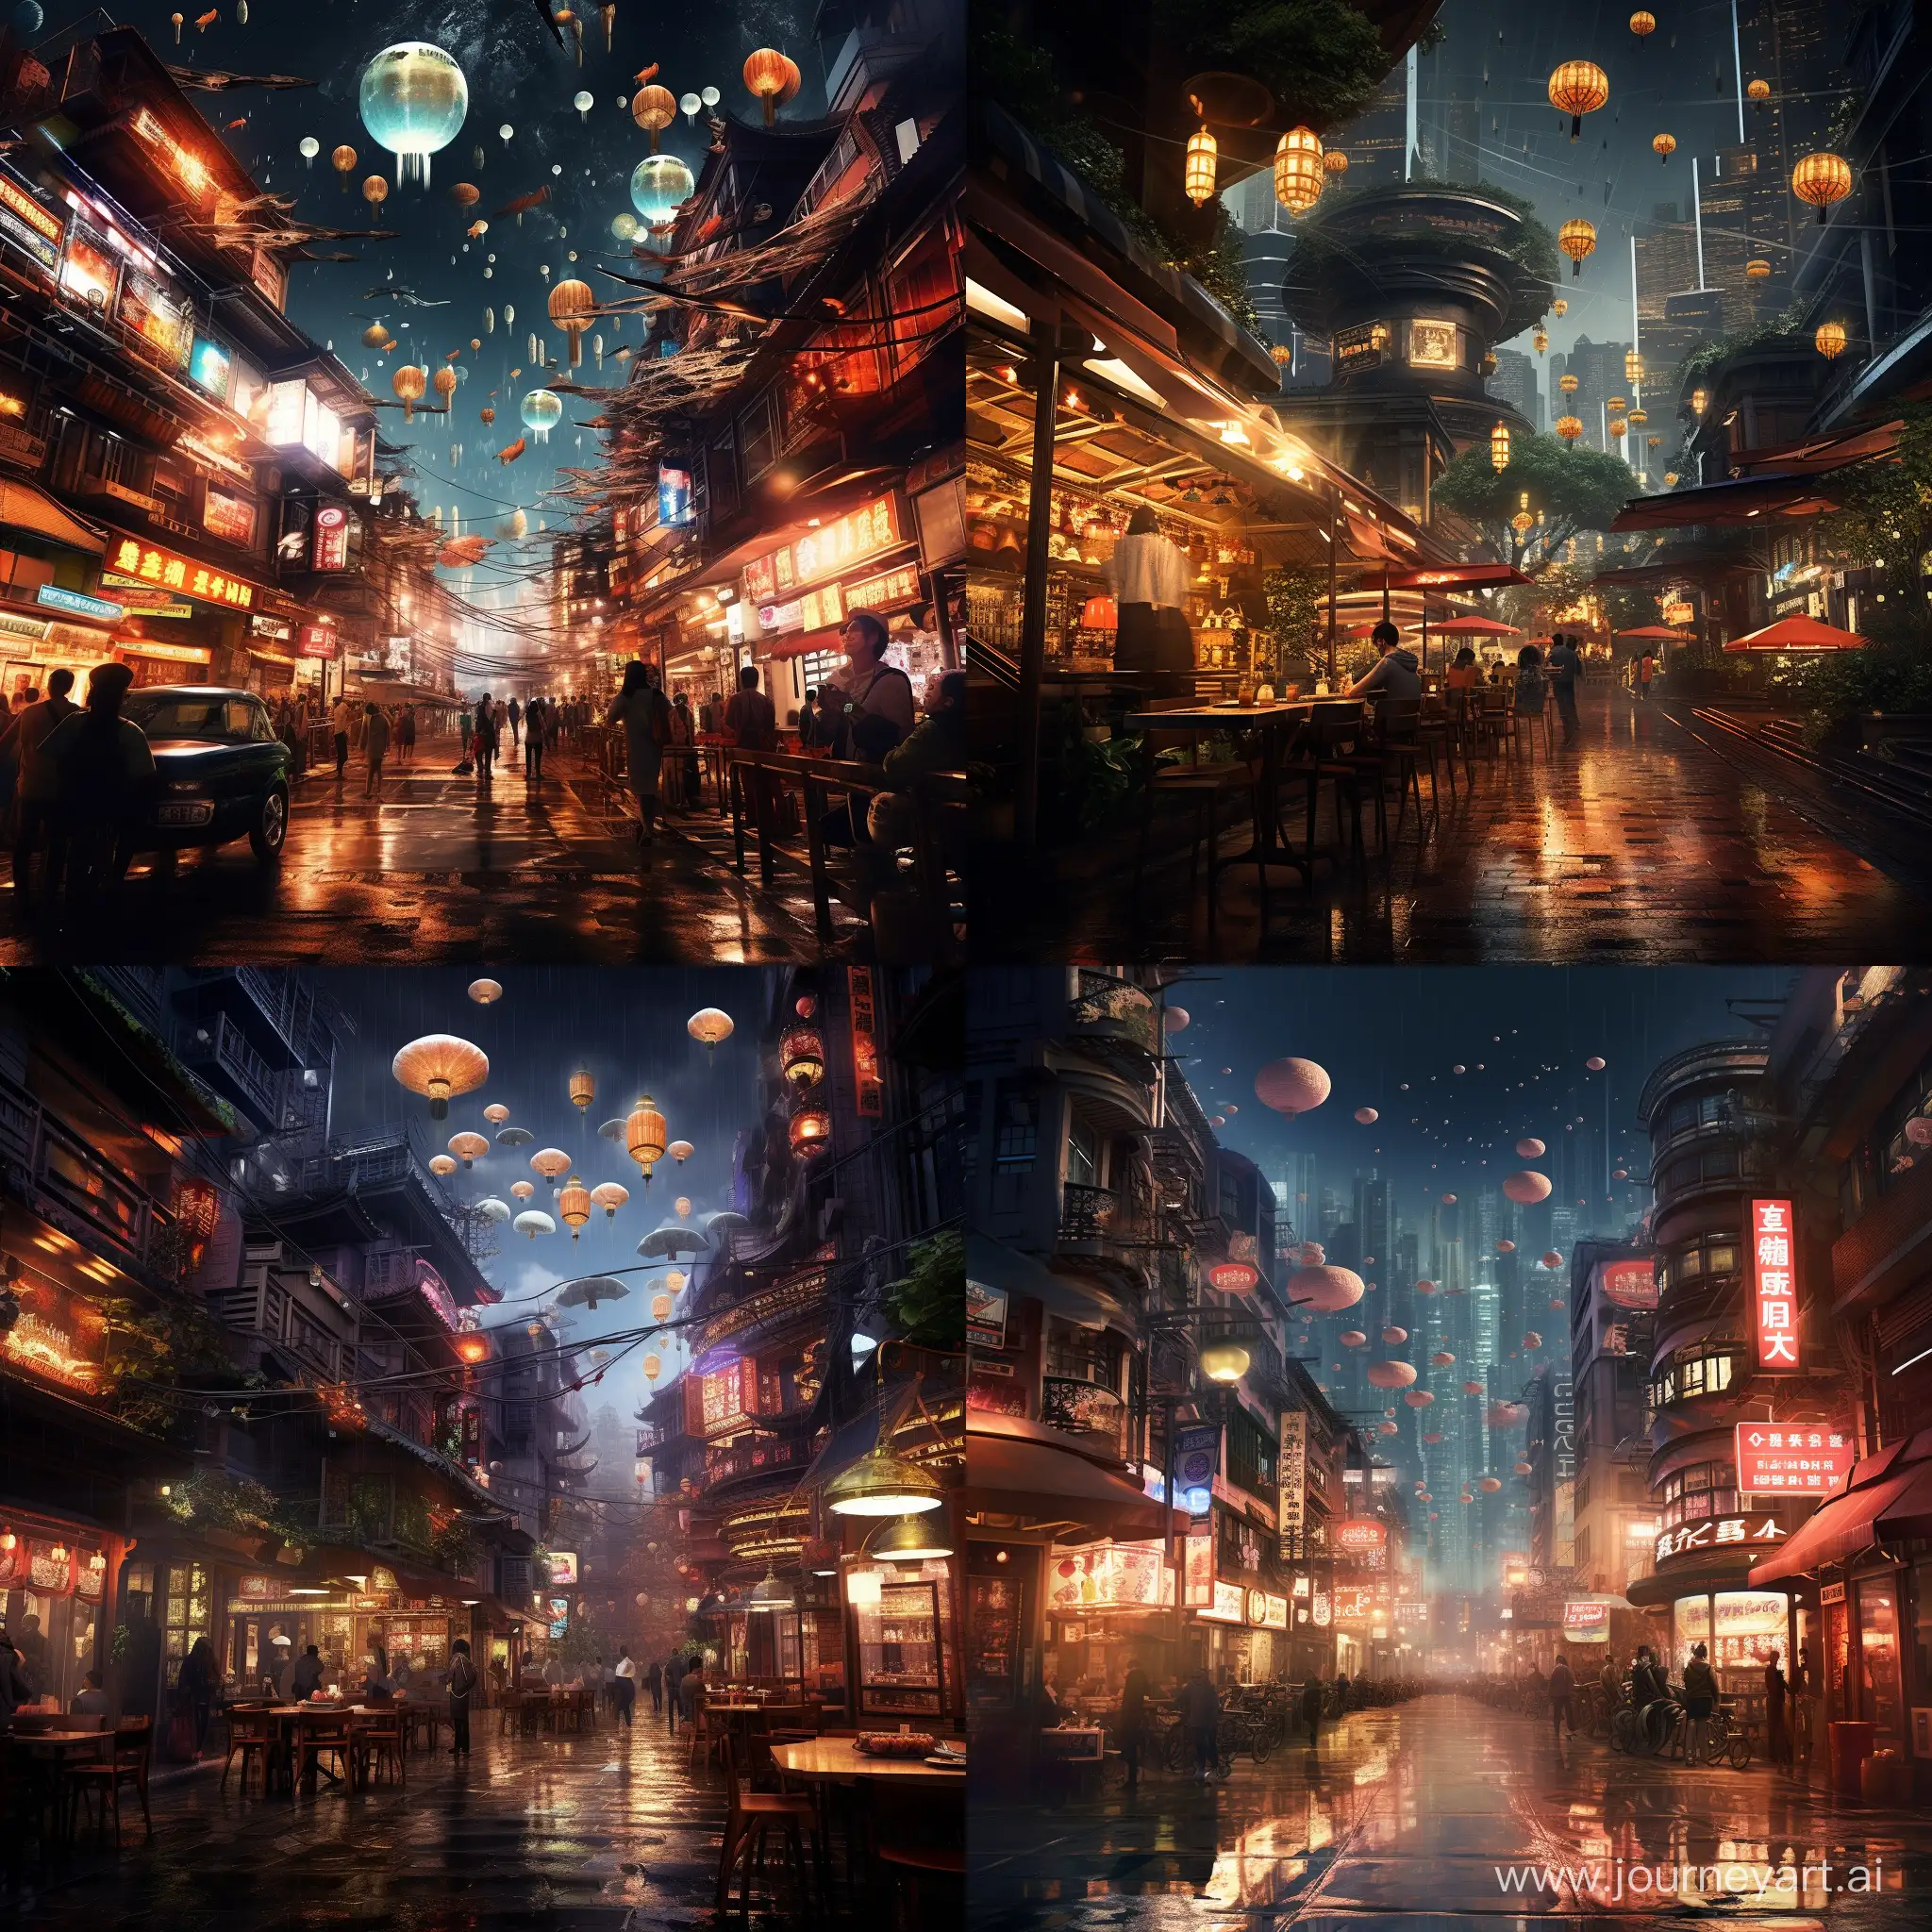 Futuristic-Cyberpunk-Cityscape-with-Flying-Cars-and-Rainy-Night-Atmosphere